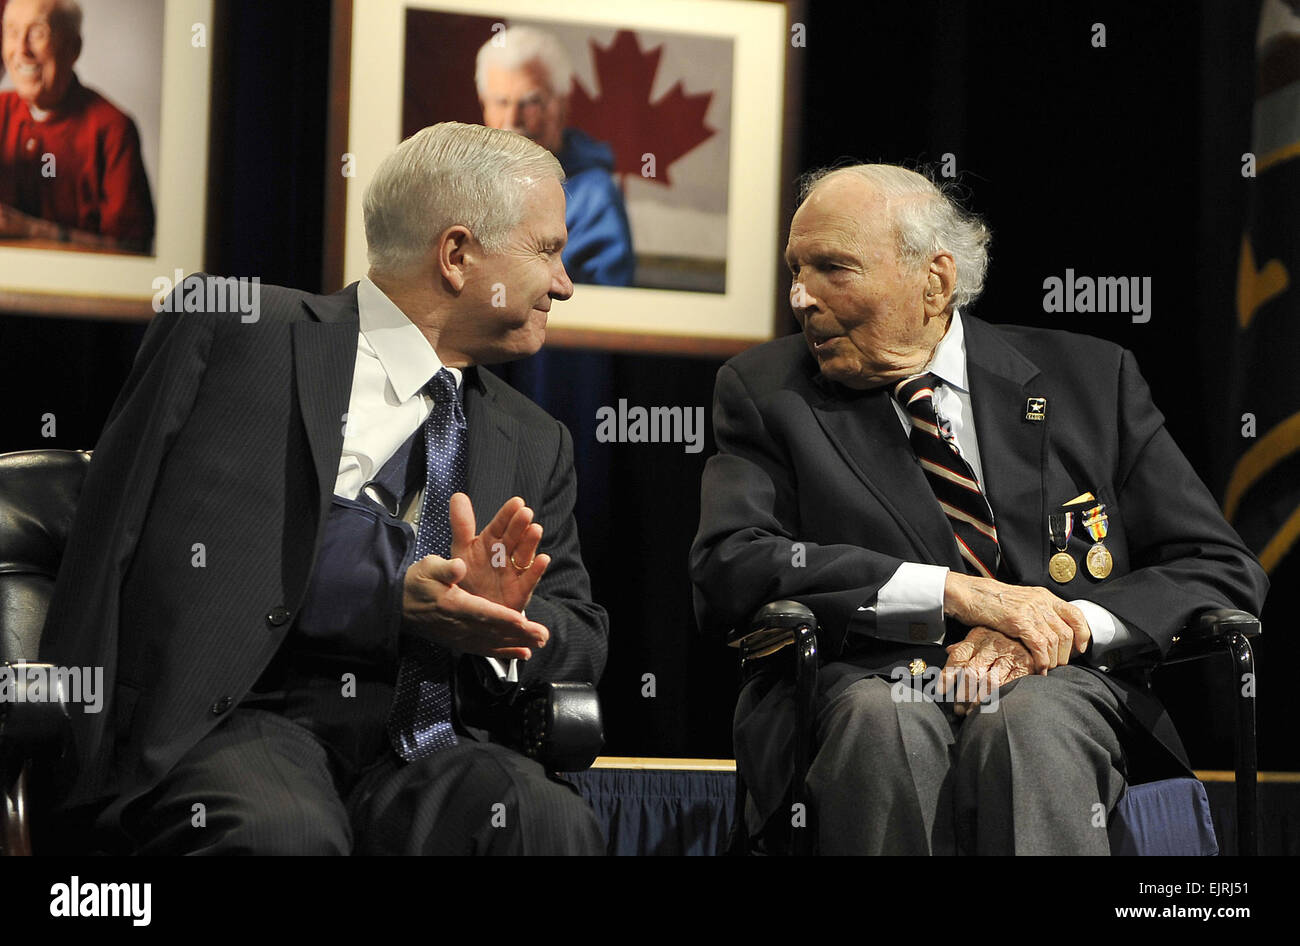 Secretary of Defense Robert M. Gates, left, talks with WWI veteran Frank Buckles during a dedication ceremony for the unveiling of portraits of WWI veterans in the Pentagon March 6, 2008.  Cherie A. Thurlby. Stock Photo